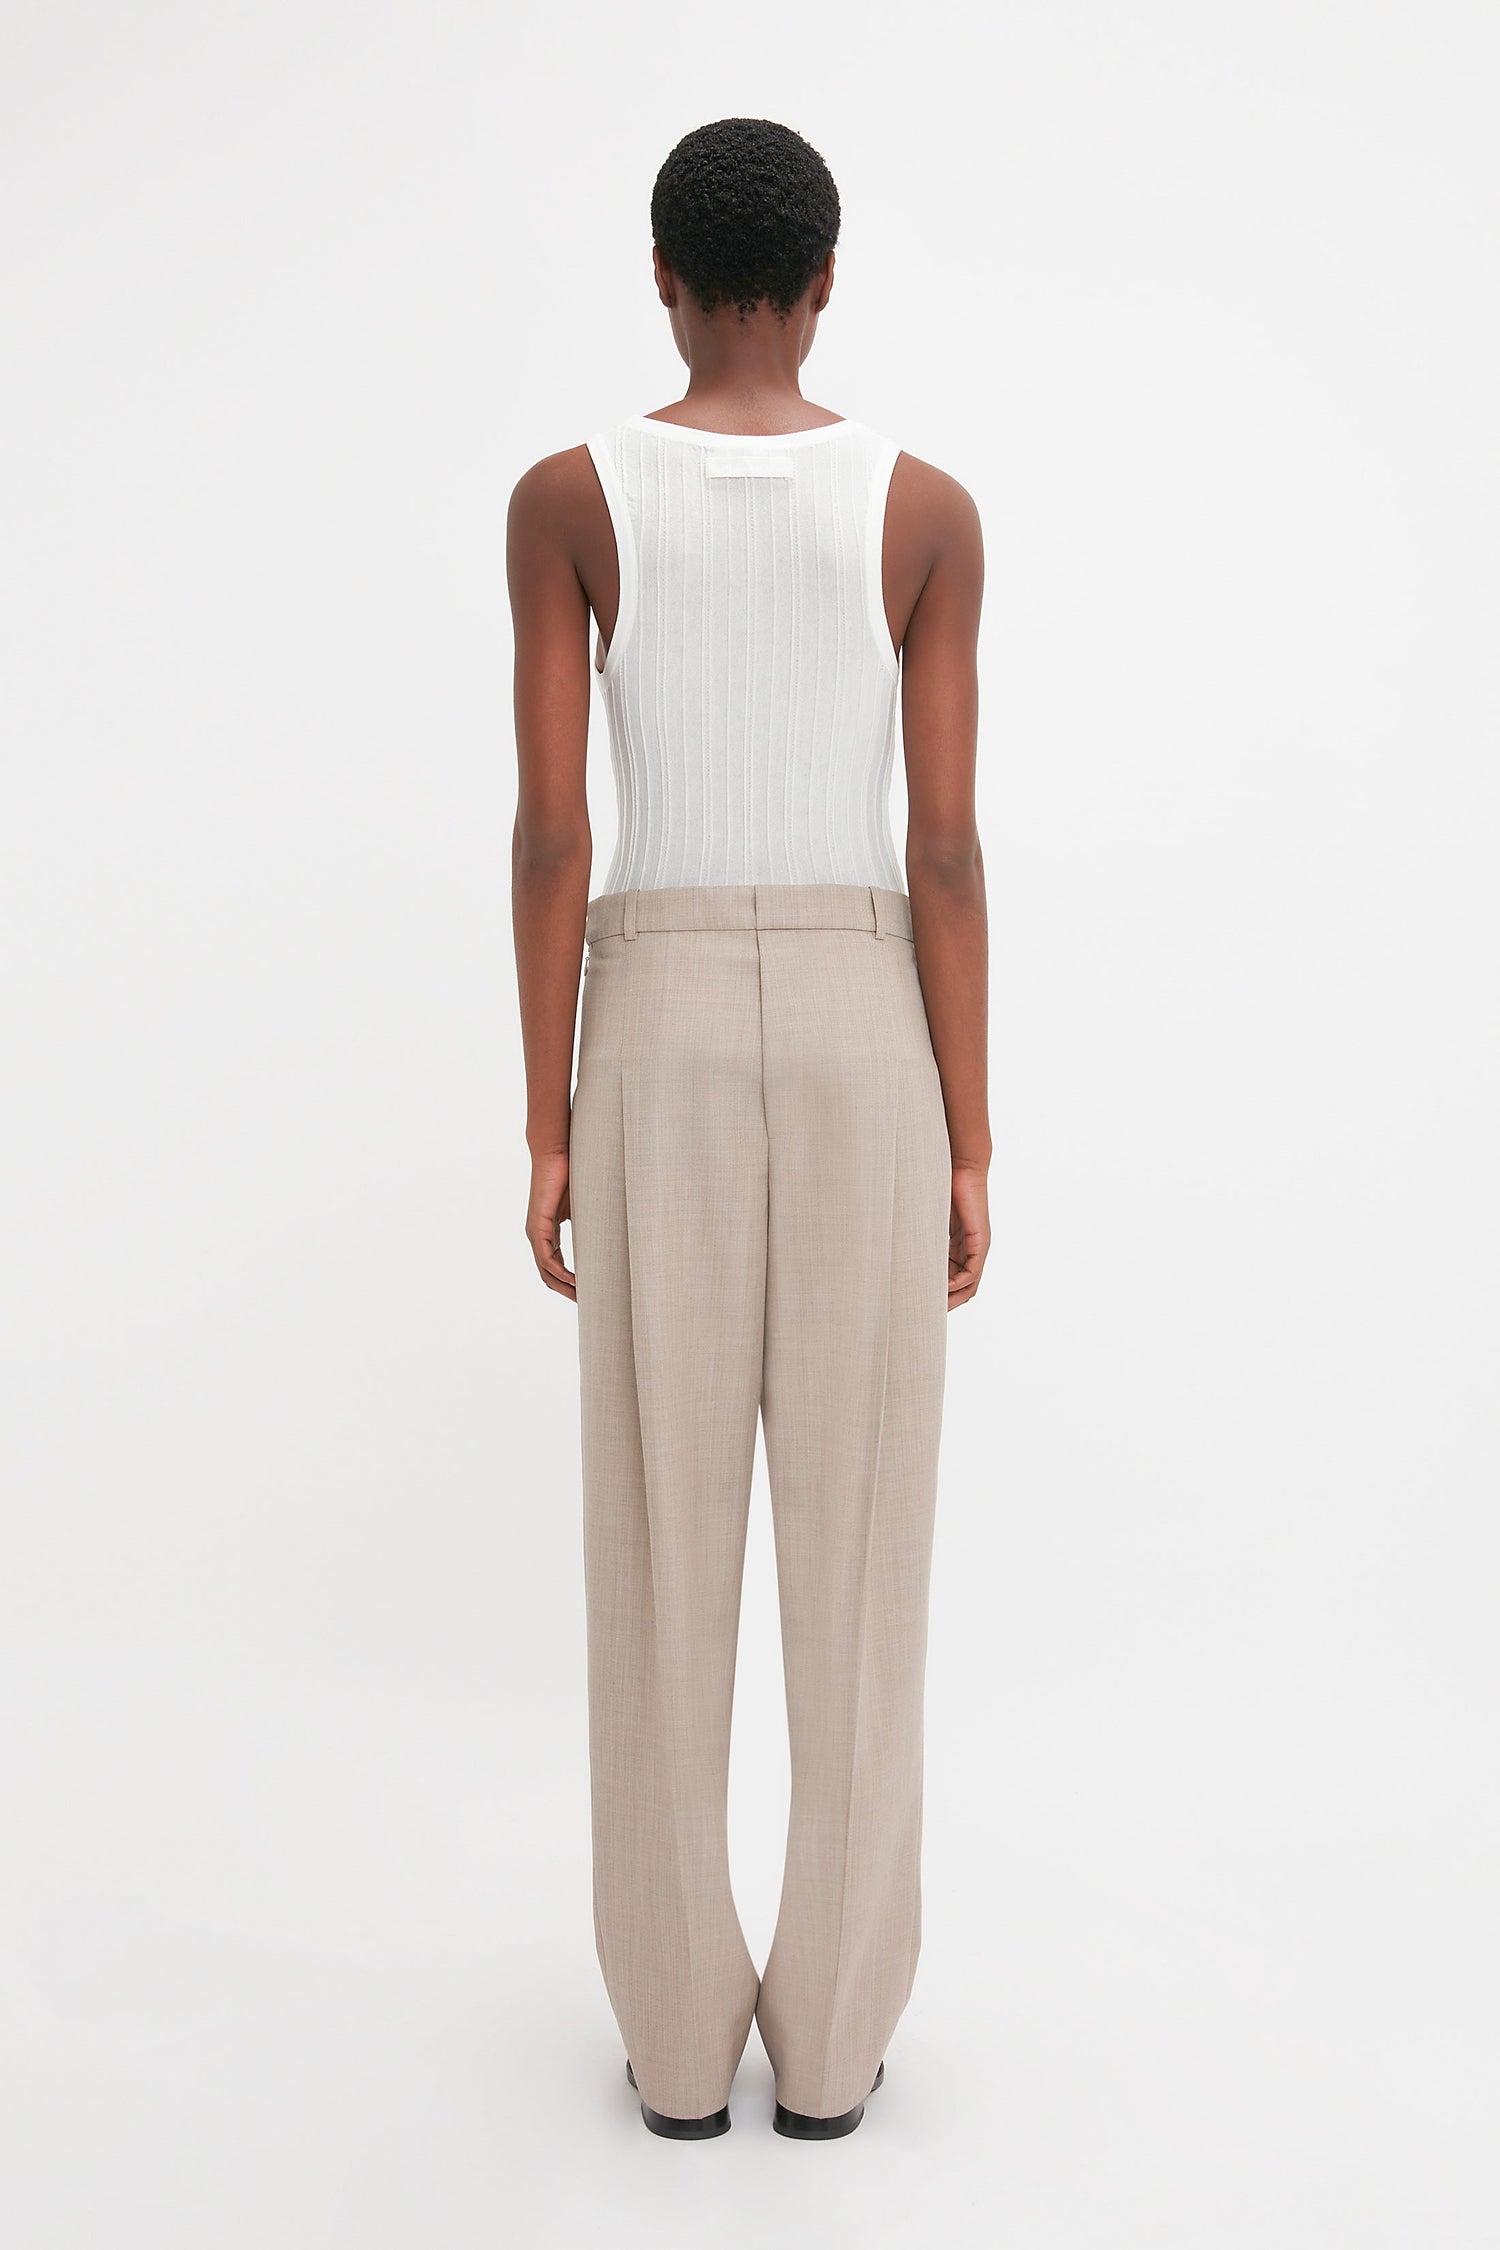 Person standing, facing away, wearing a Fine Knit Vertical Stripe Tank In White and beige trousers against a plain white background. The ensemble, reminiscent of Victoria Beckham's minimalist style, boasts a subtly textured appearance that adds depth to the simplicity.